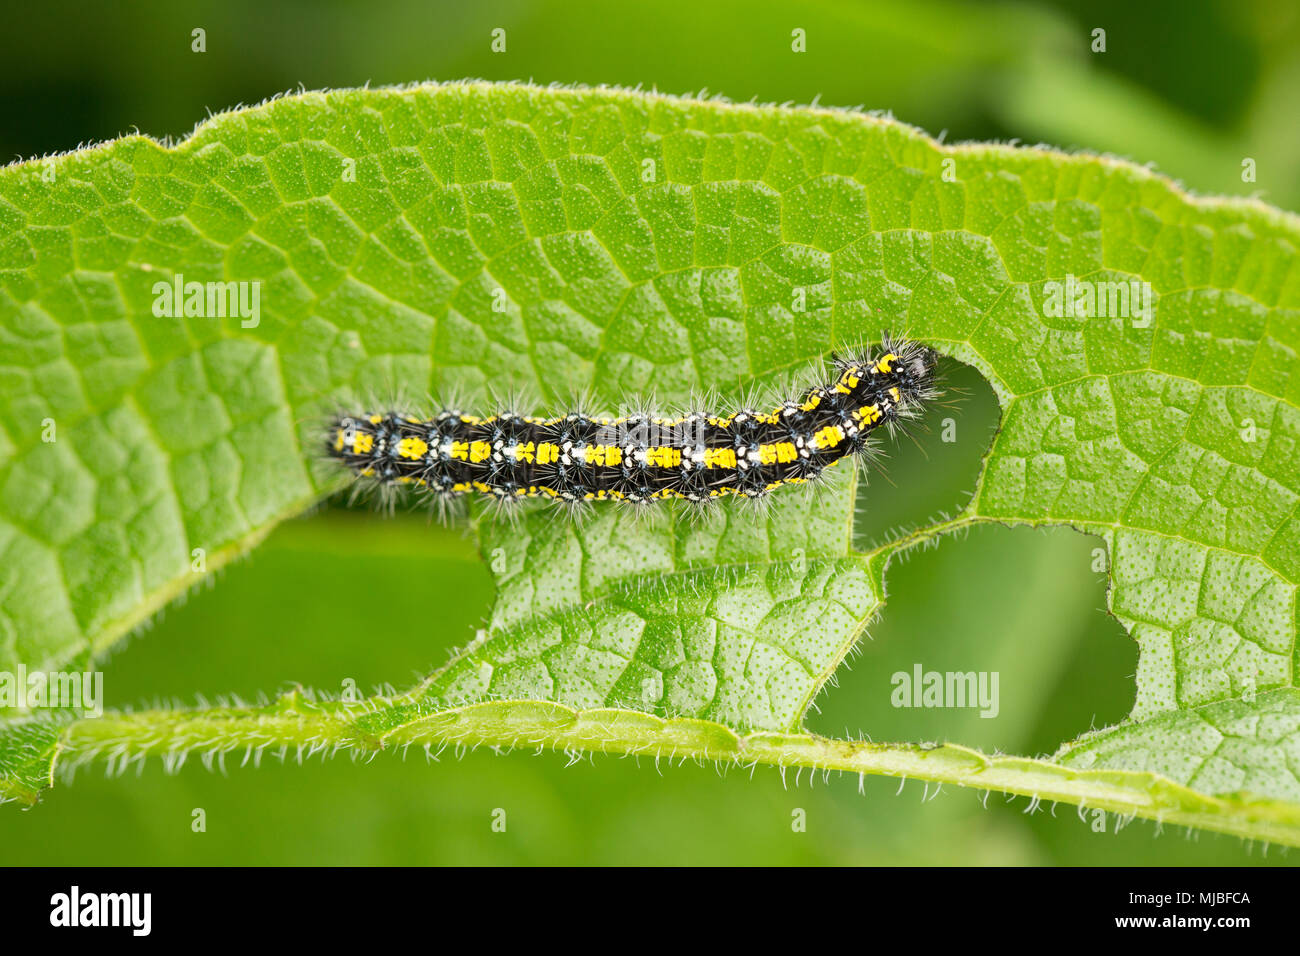 Scarlet tiger moth caterpillar, Callimorpha dominula, found feeding on a comfrey leaf, Symphytum officinale, by the side of a country road in North Do Stock Photo